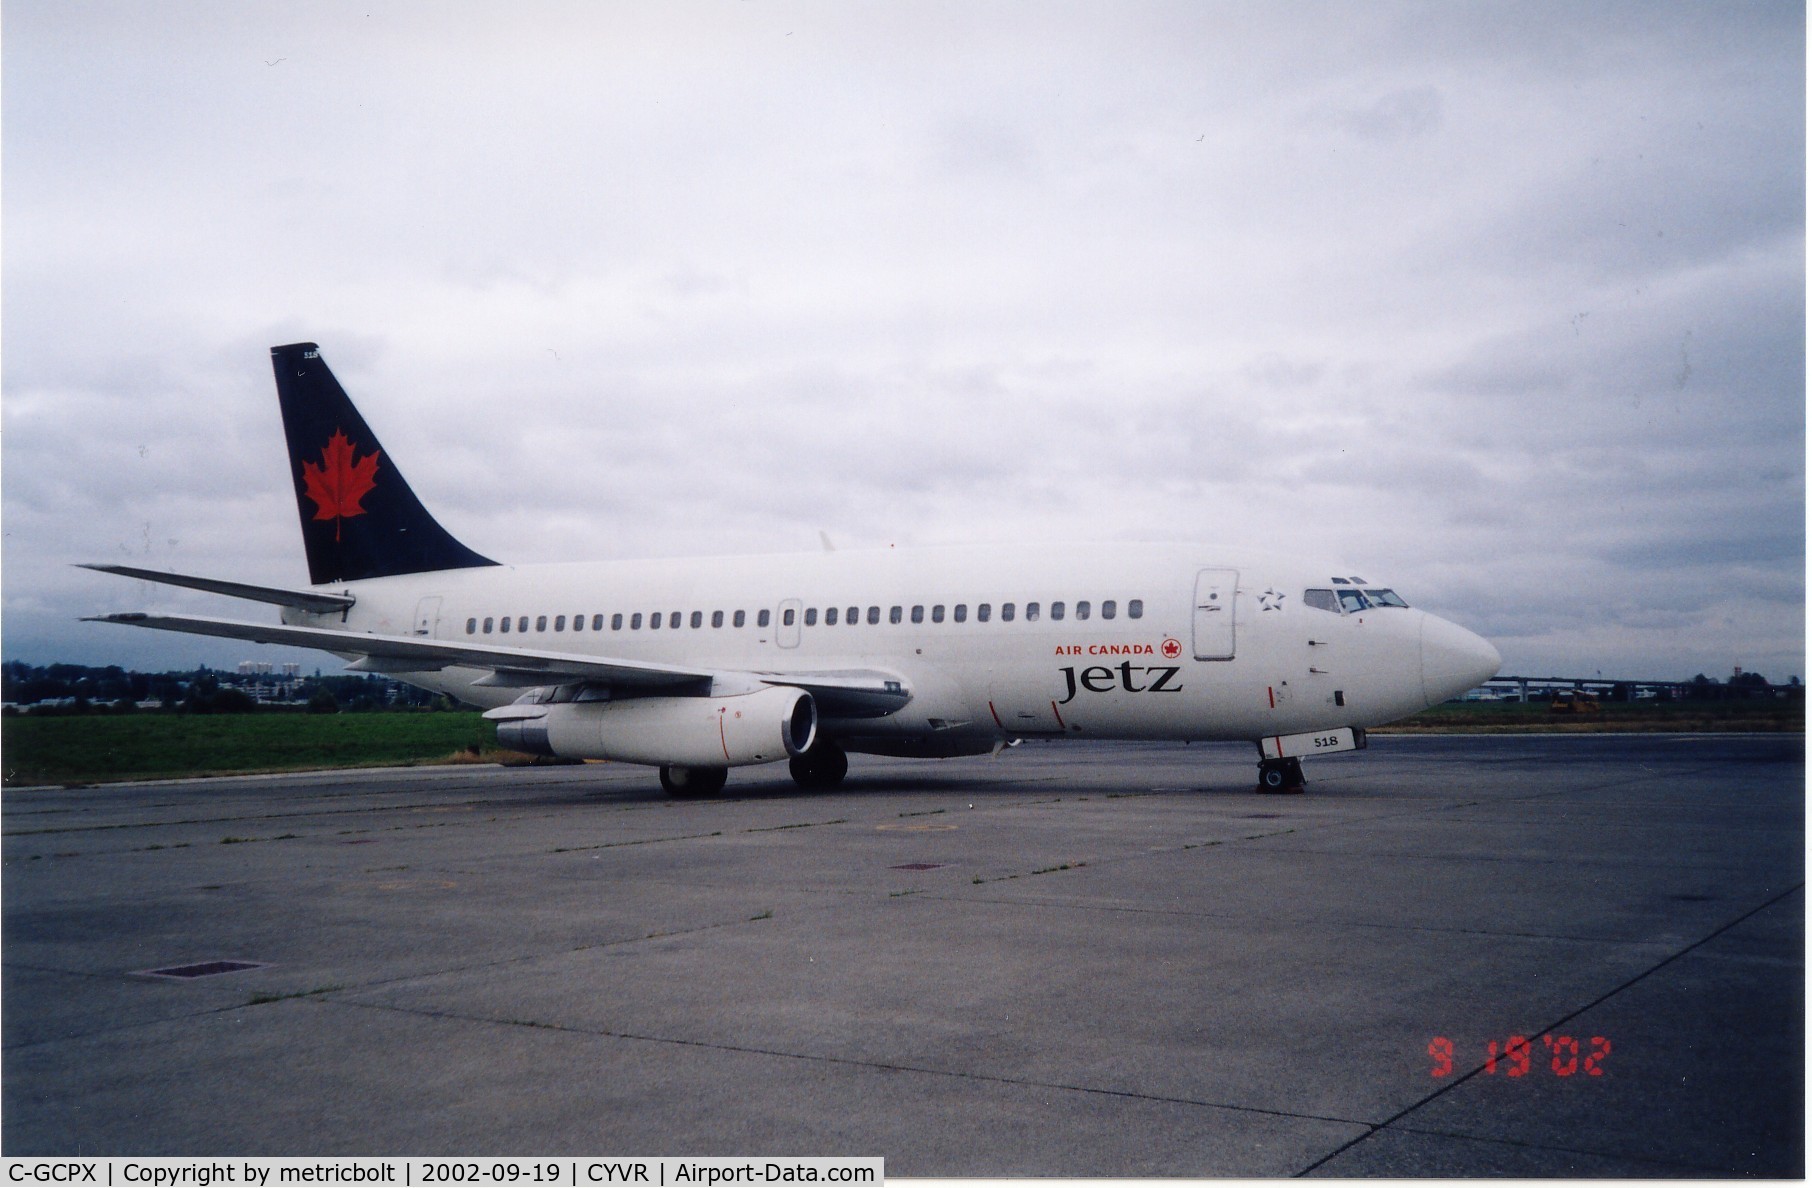 C-GCPX, 1981 Boeing 737-217 C/N 22341, ex Canadian Airlines B737 flying for AC Jetz